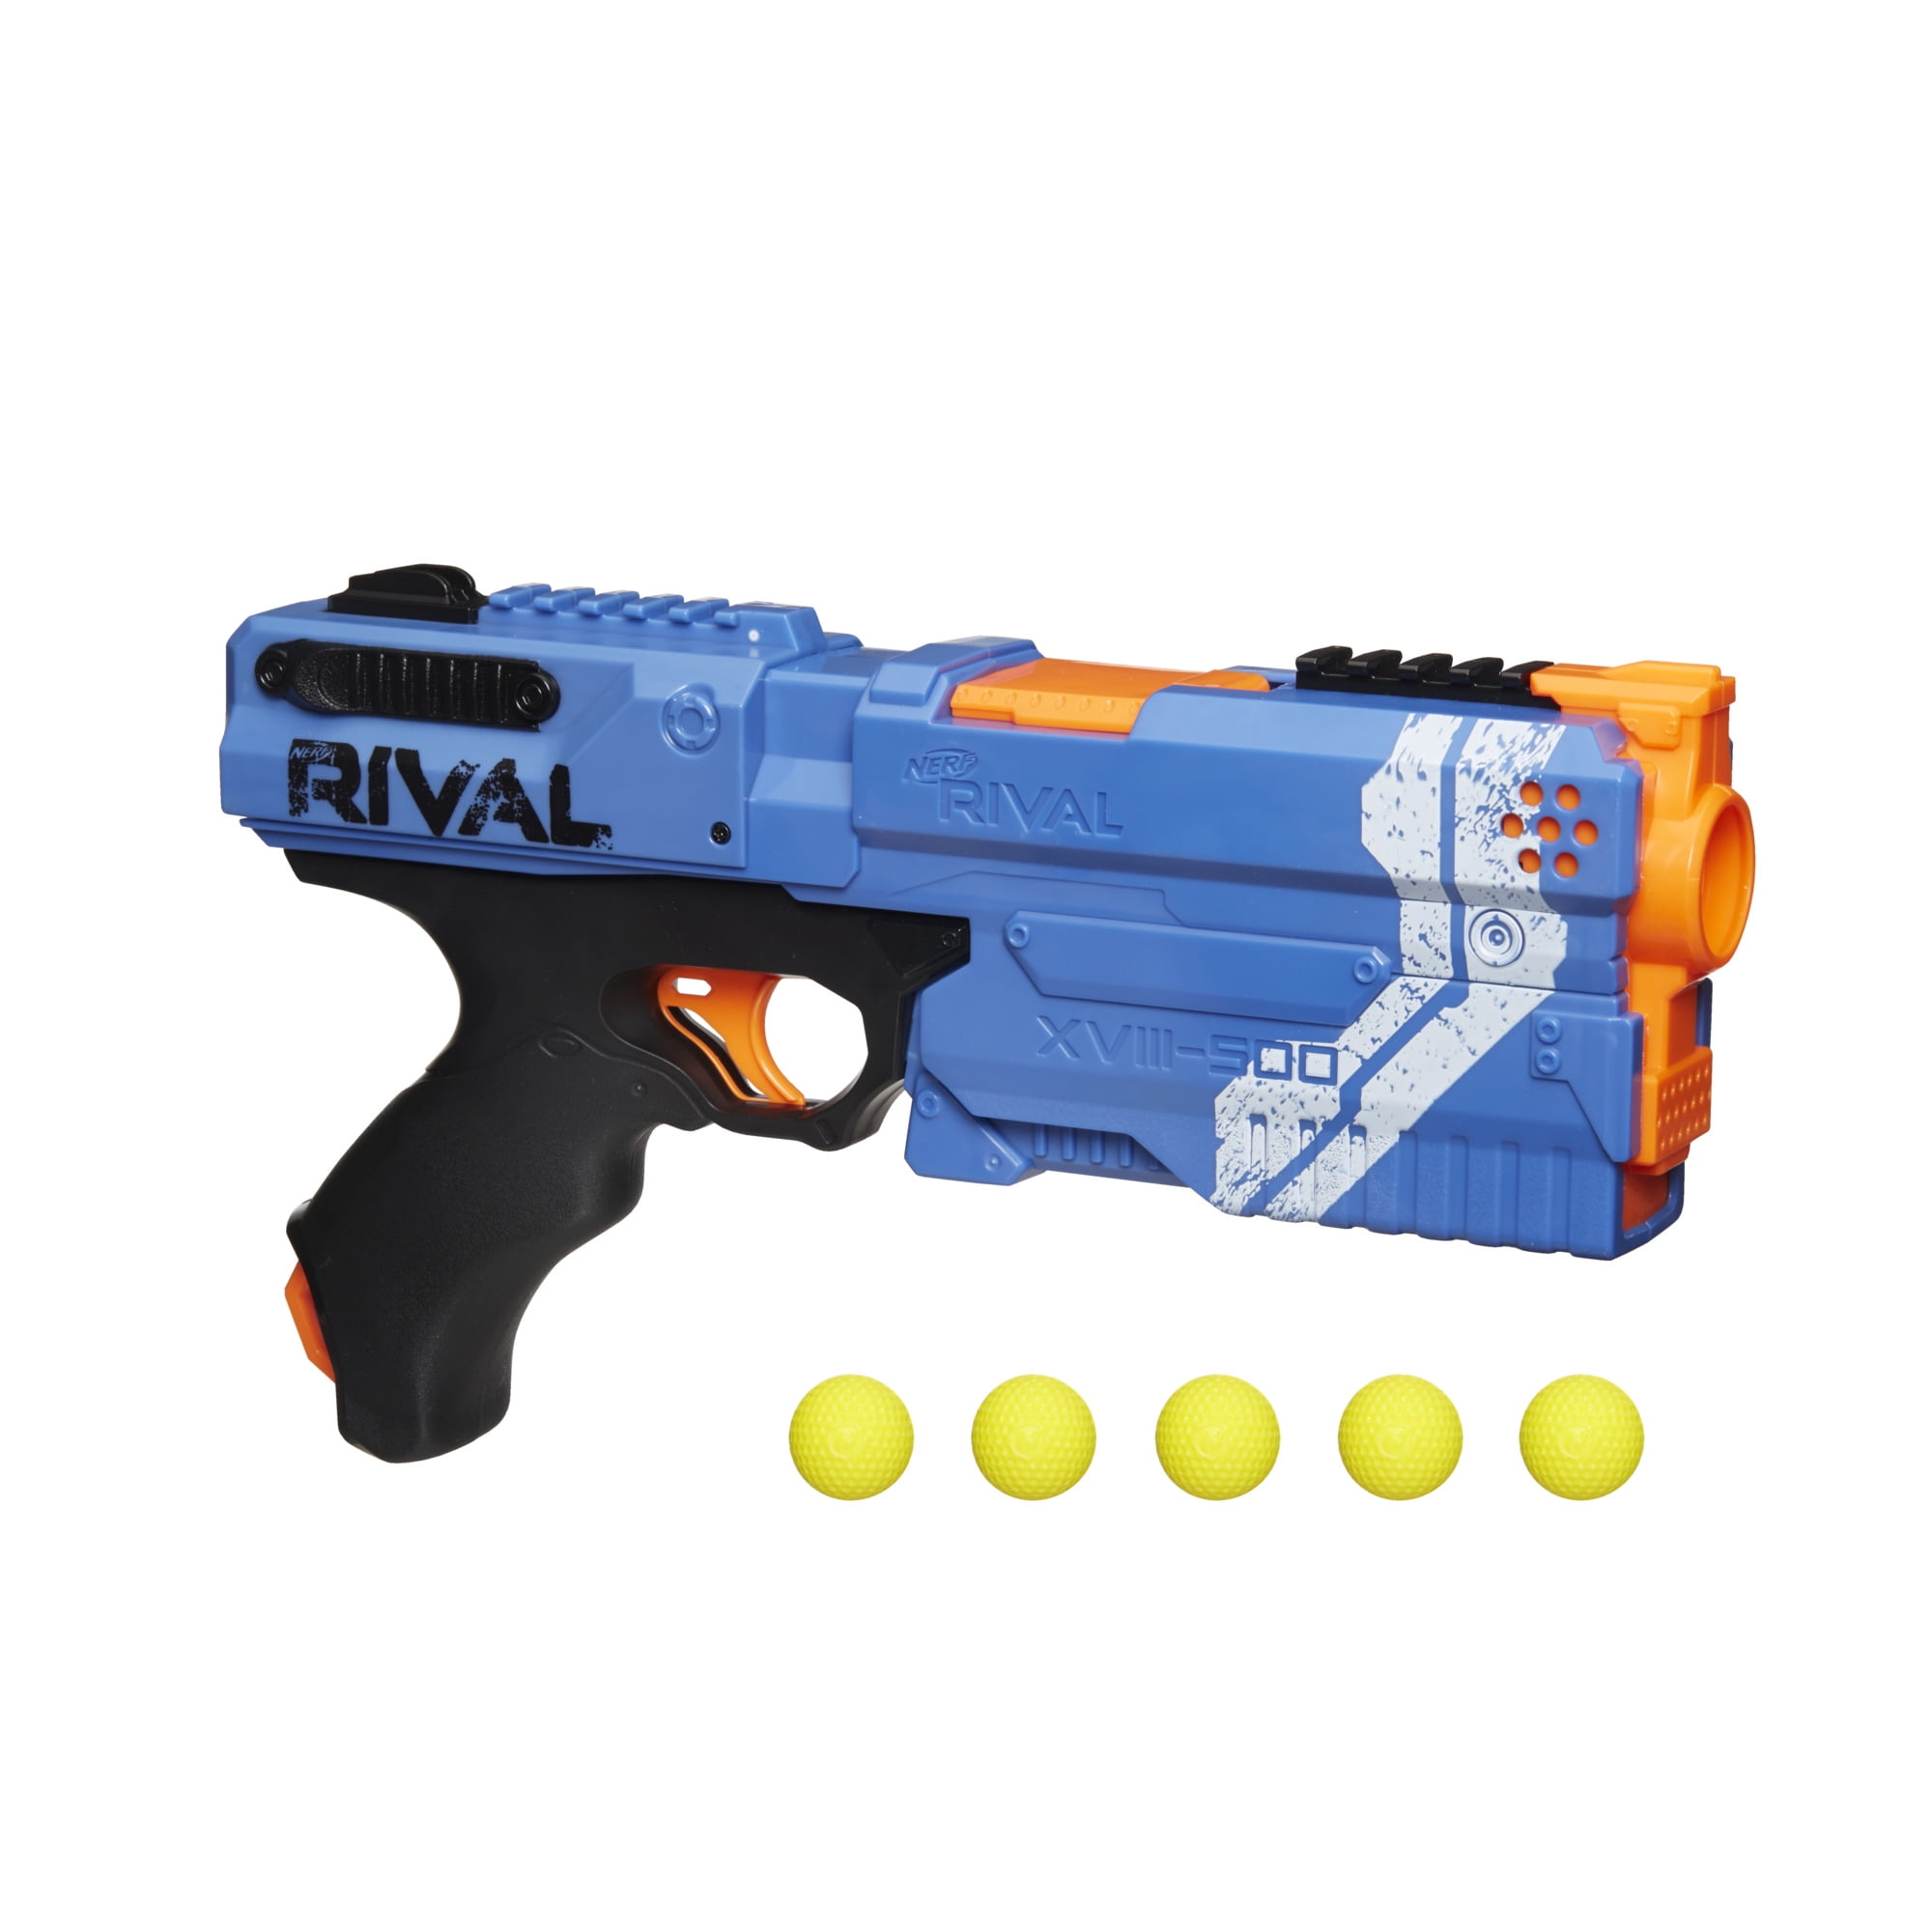 Nerf Rival 18x High Impact Rounds Refill Pack 12 Round Magazine Hasbro for sale online 